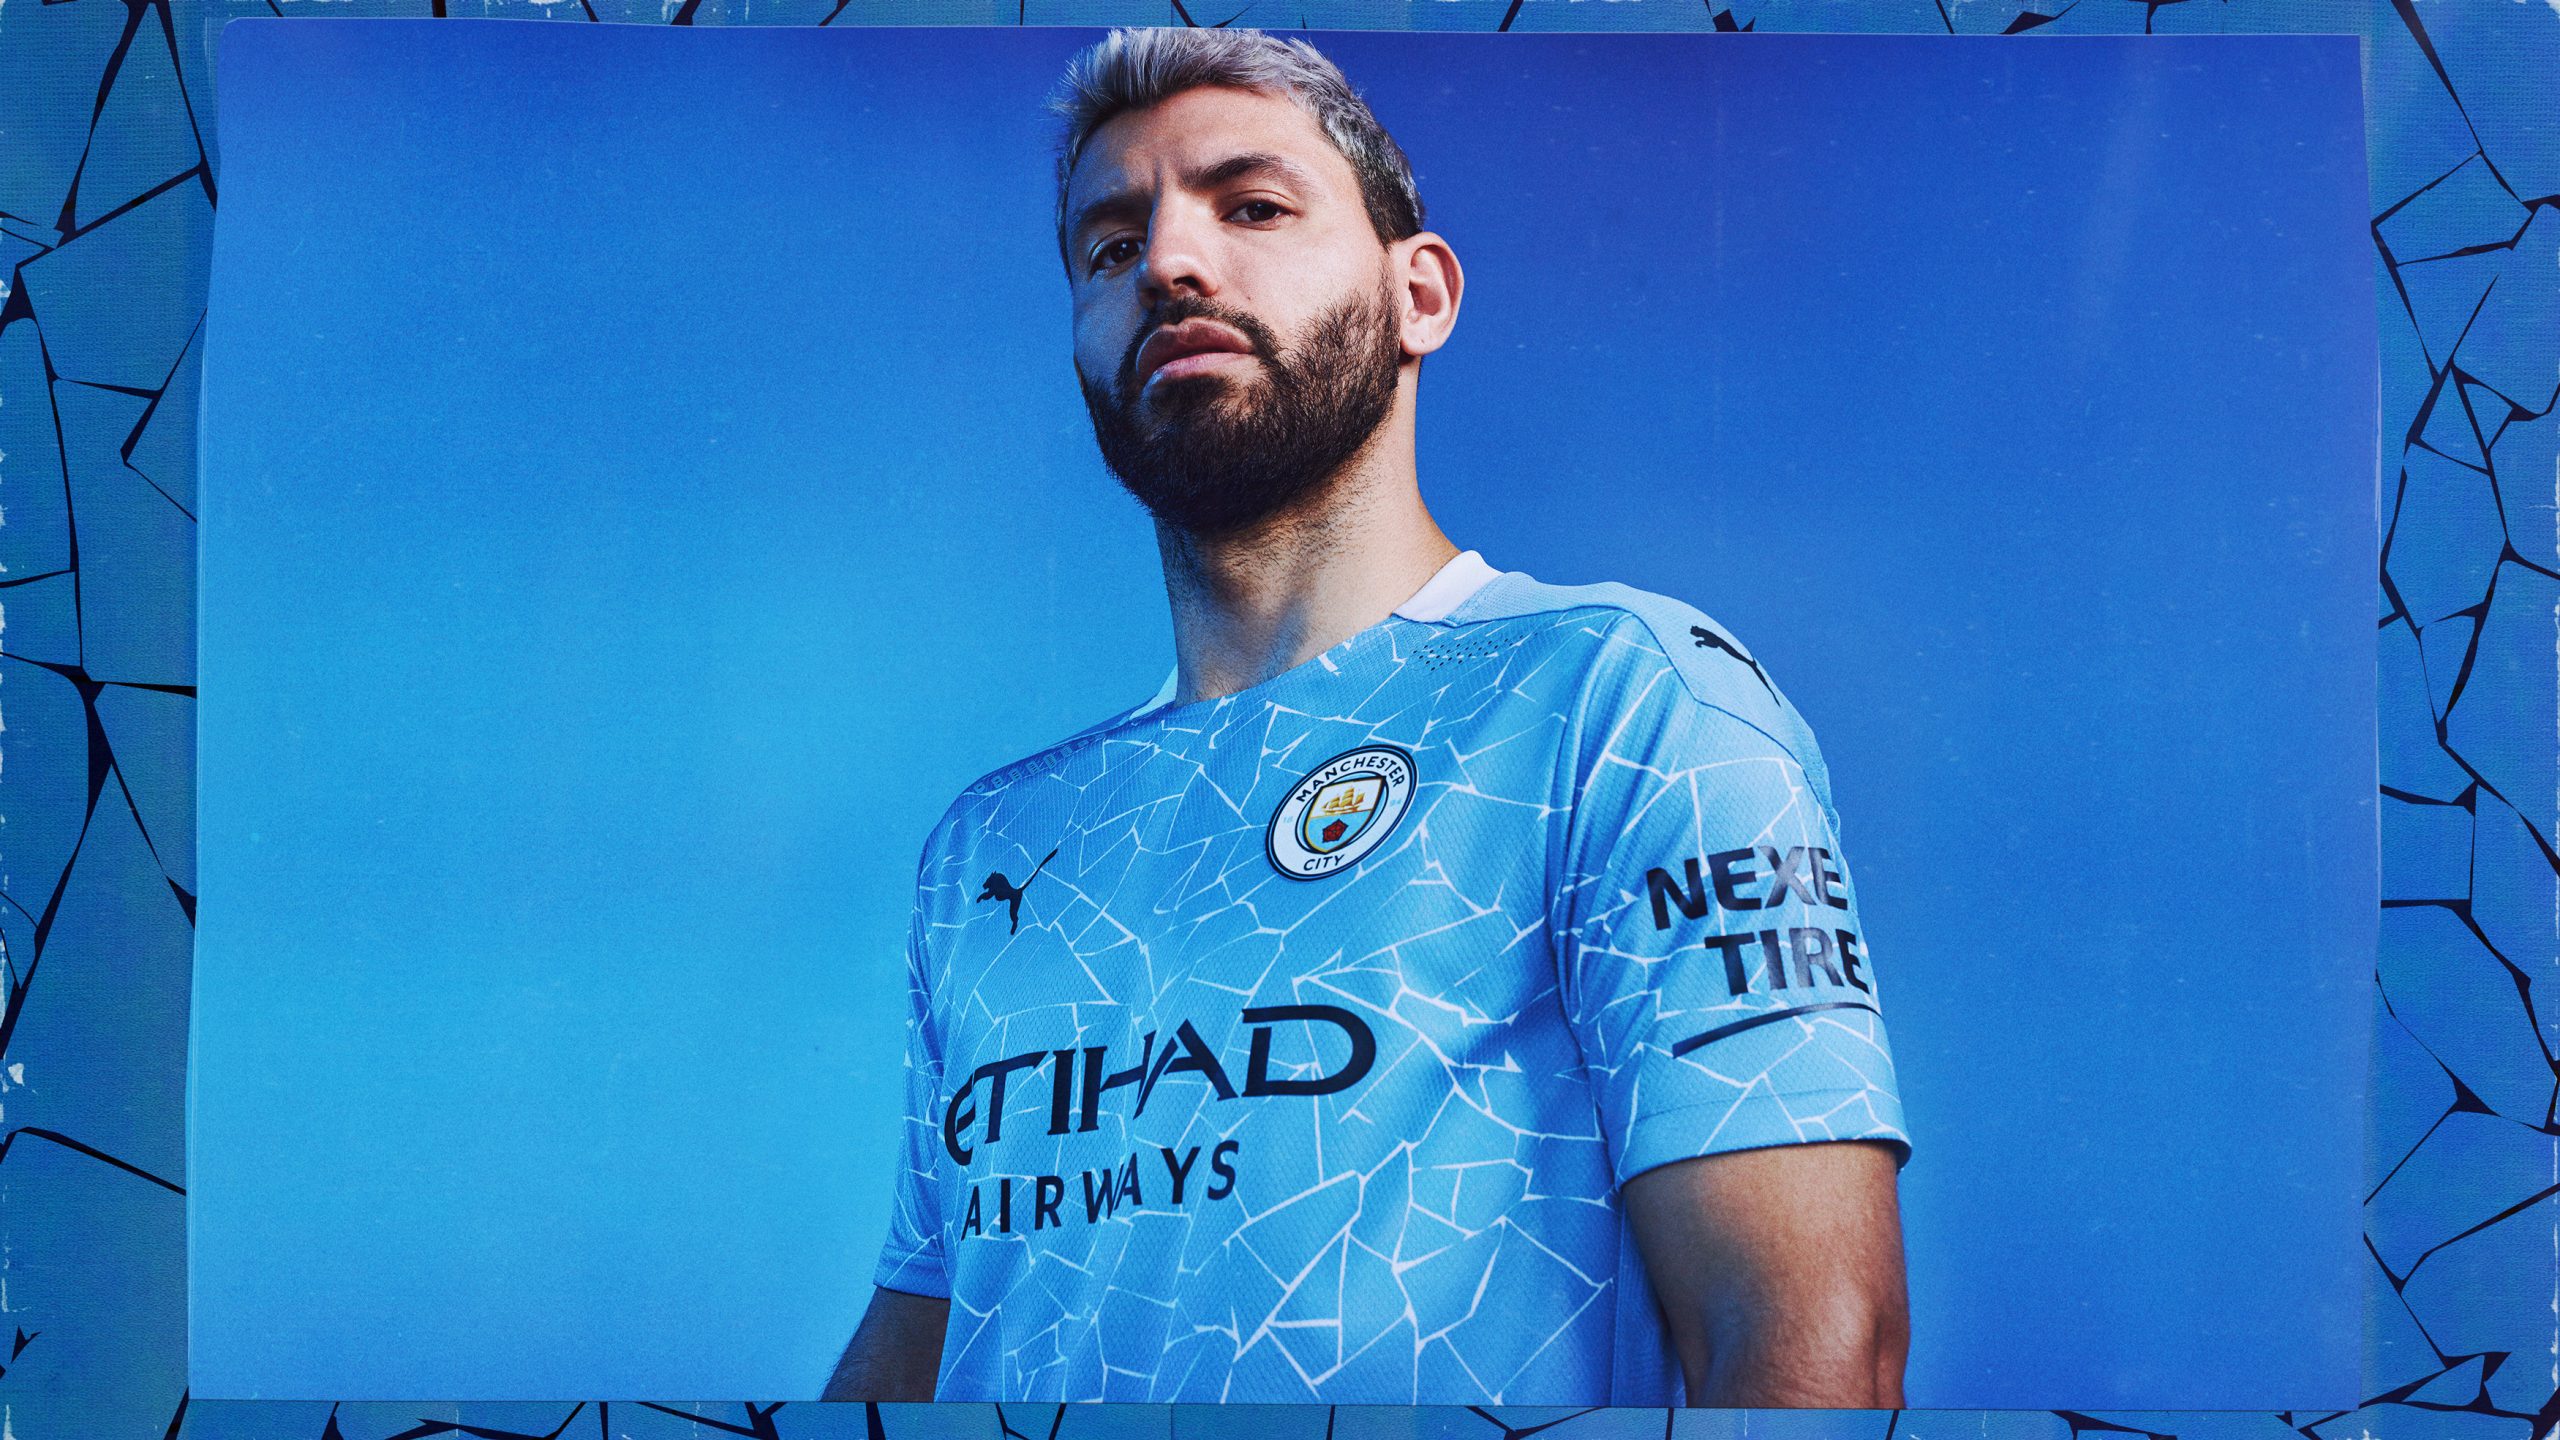 Manchester City’s new jersey